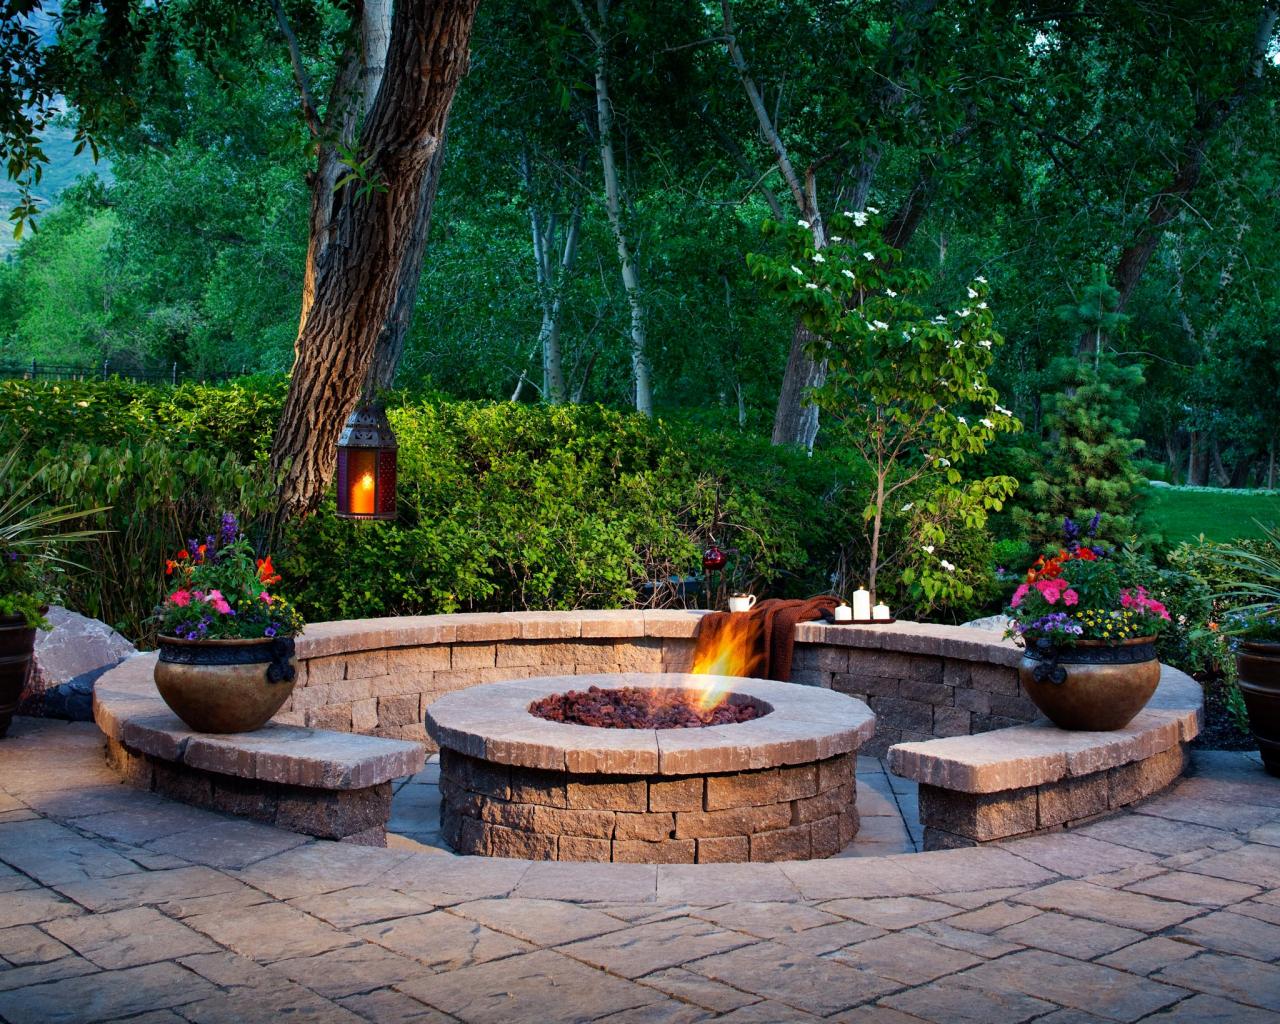 Designing A Patio Around Fire Pit Diy, Built In Fire Pit